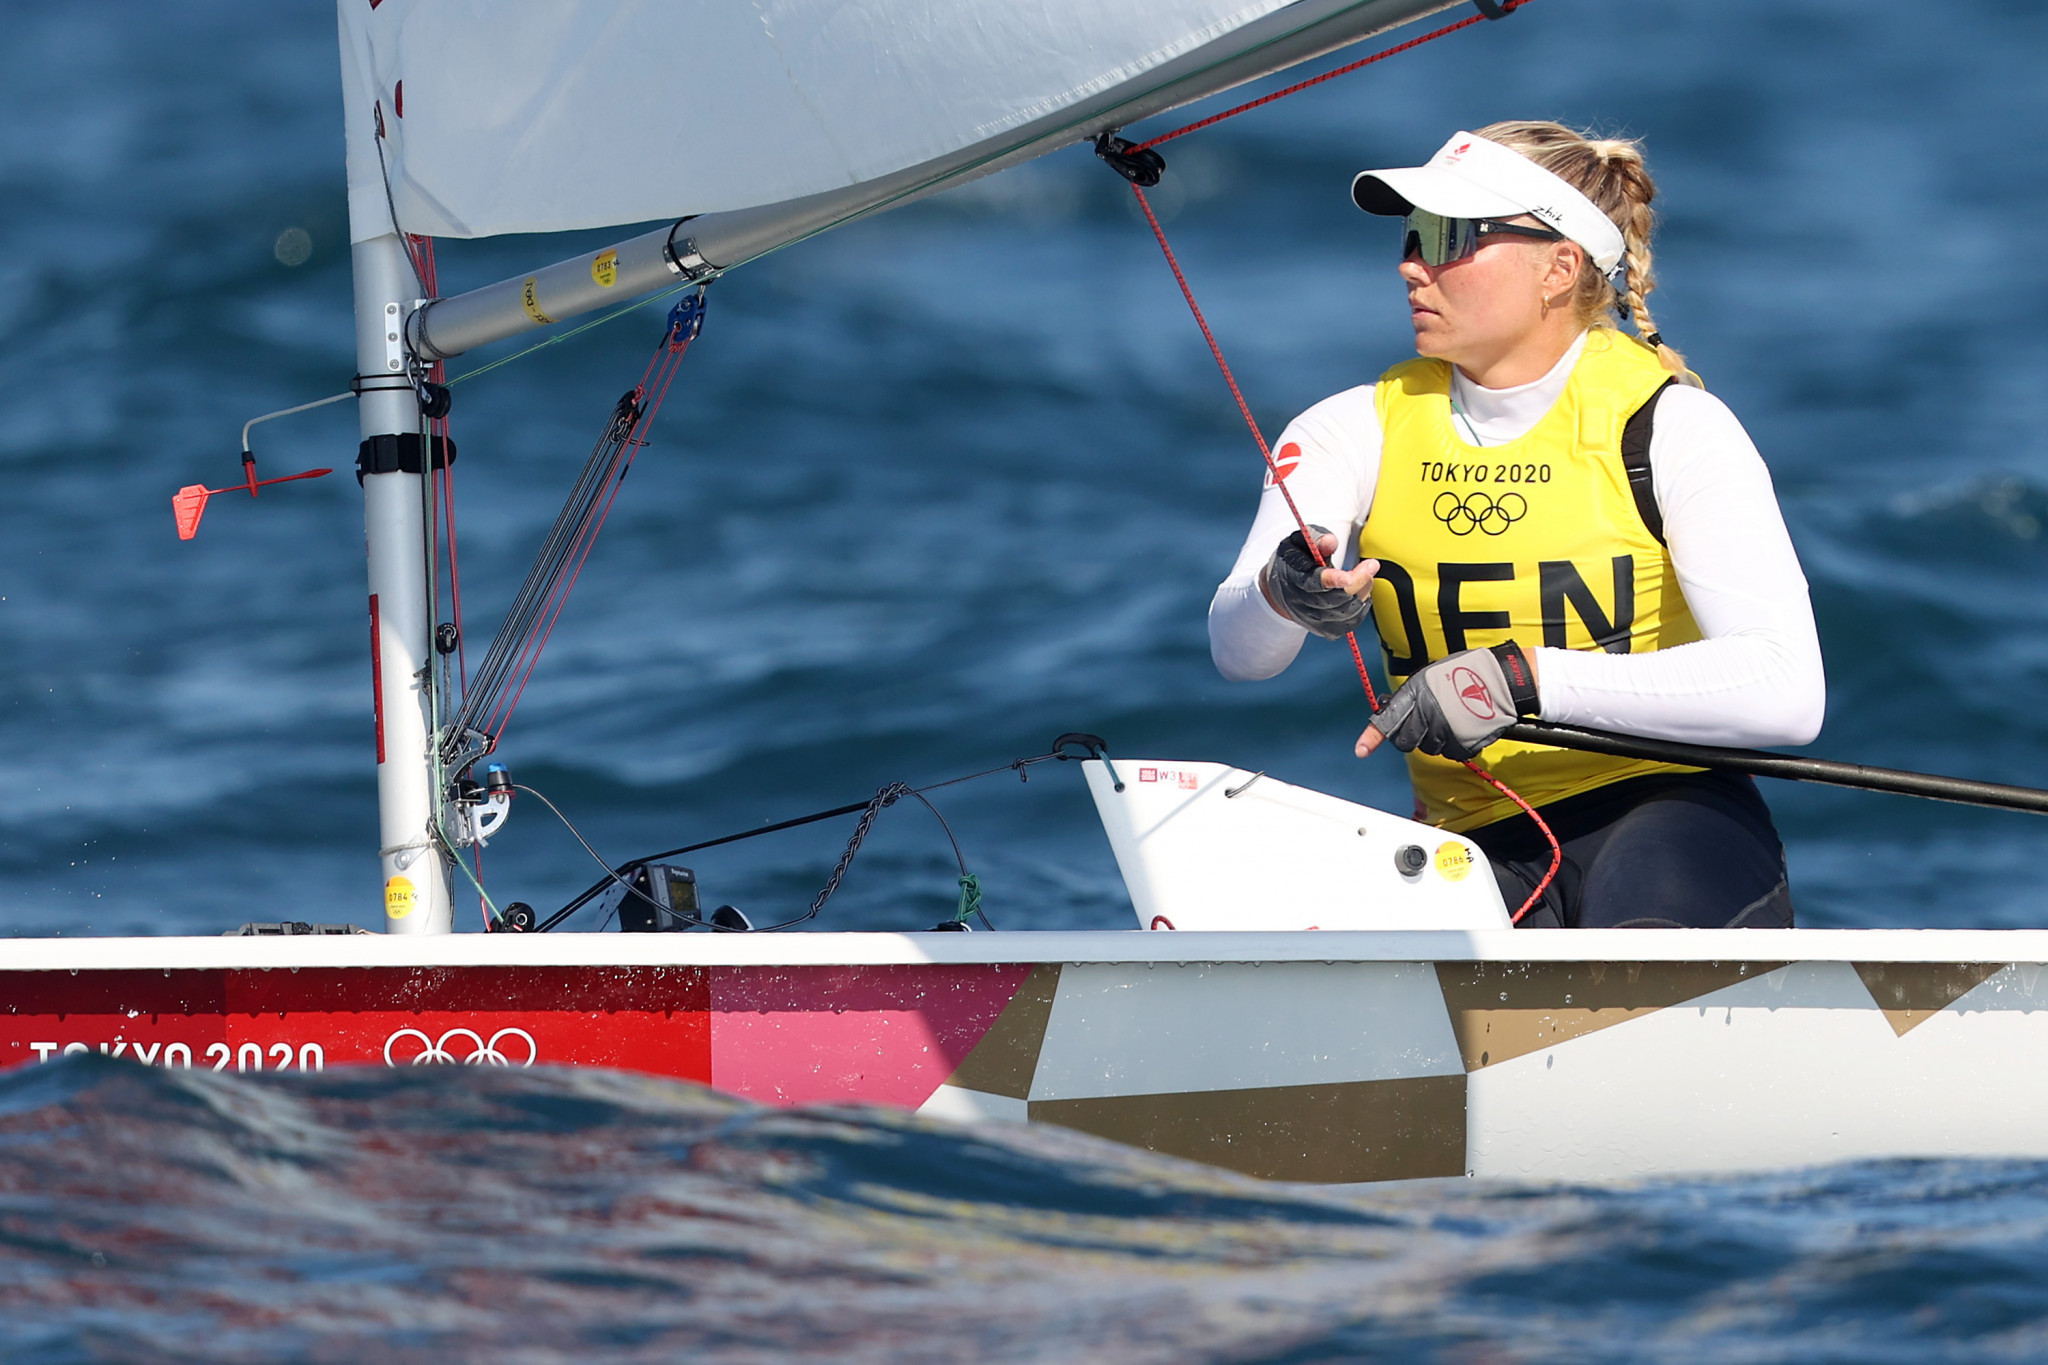 Denmark's Anne-Marie Rindom earned the women's laser radial title at the Tokyo 2020 Olympic Games ©Getty Images